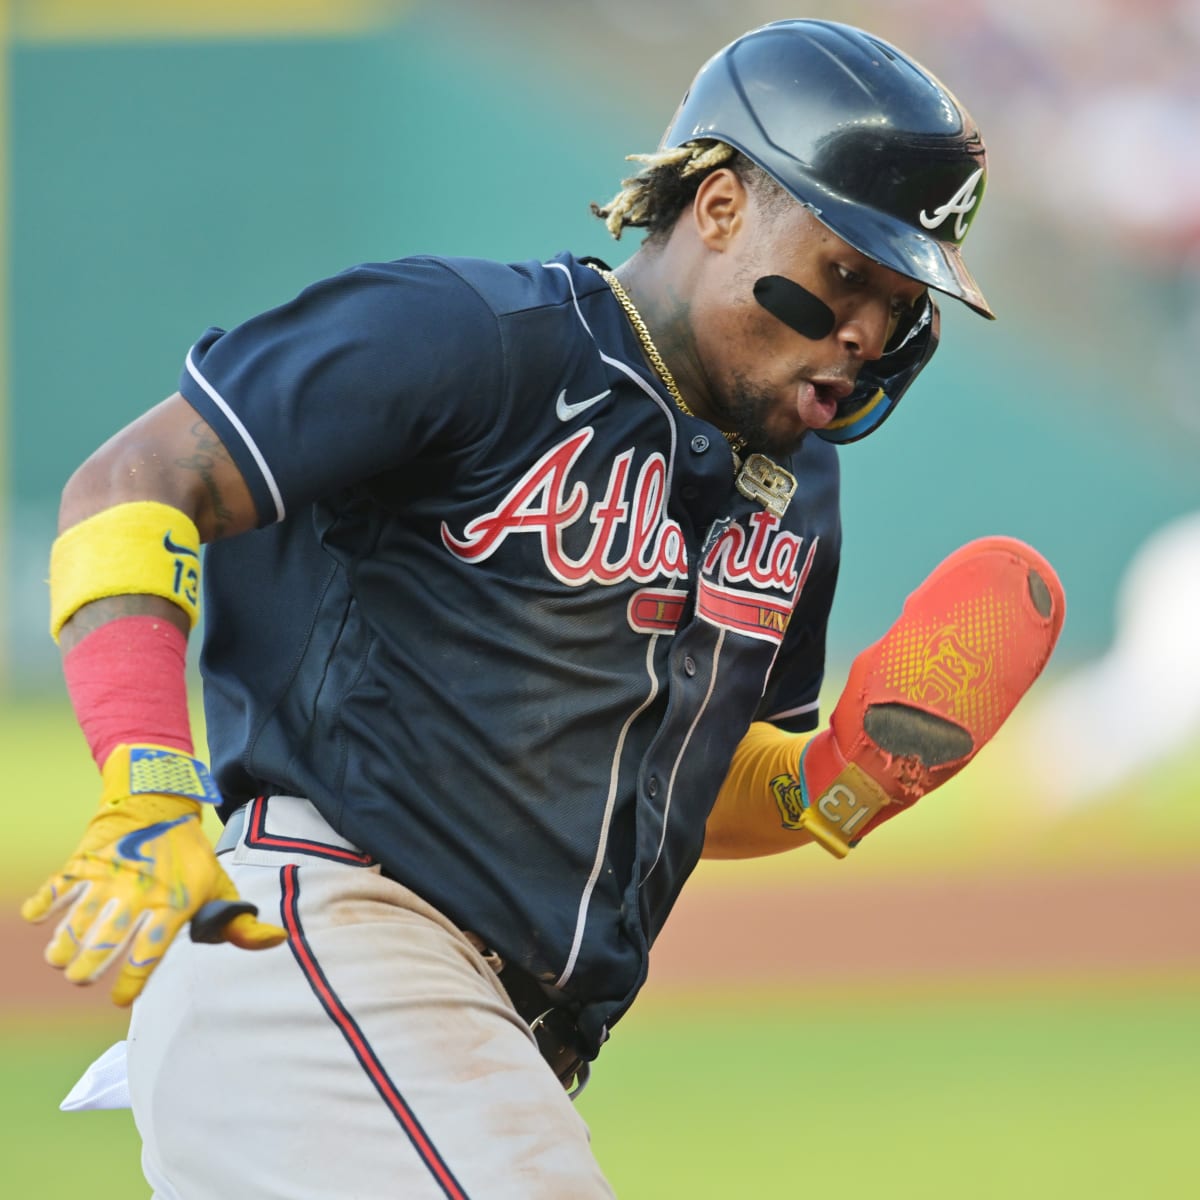 Ronald Acuna looks like a star for the Braves - Sports Illustrated